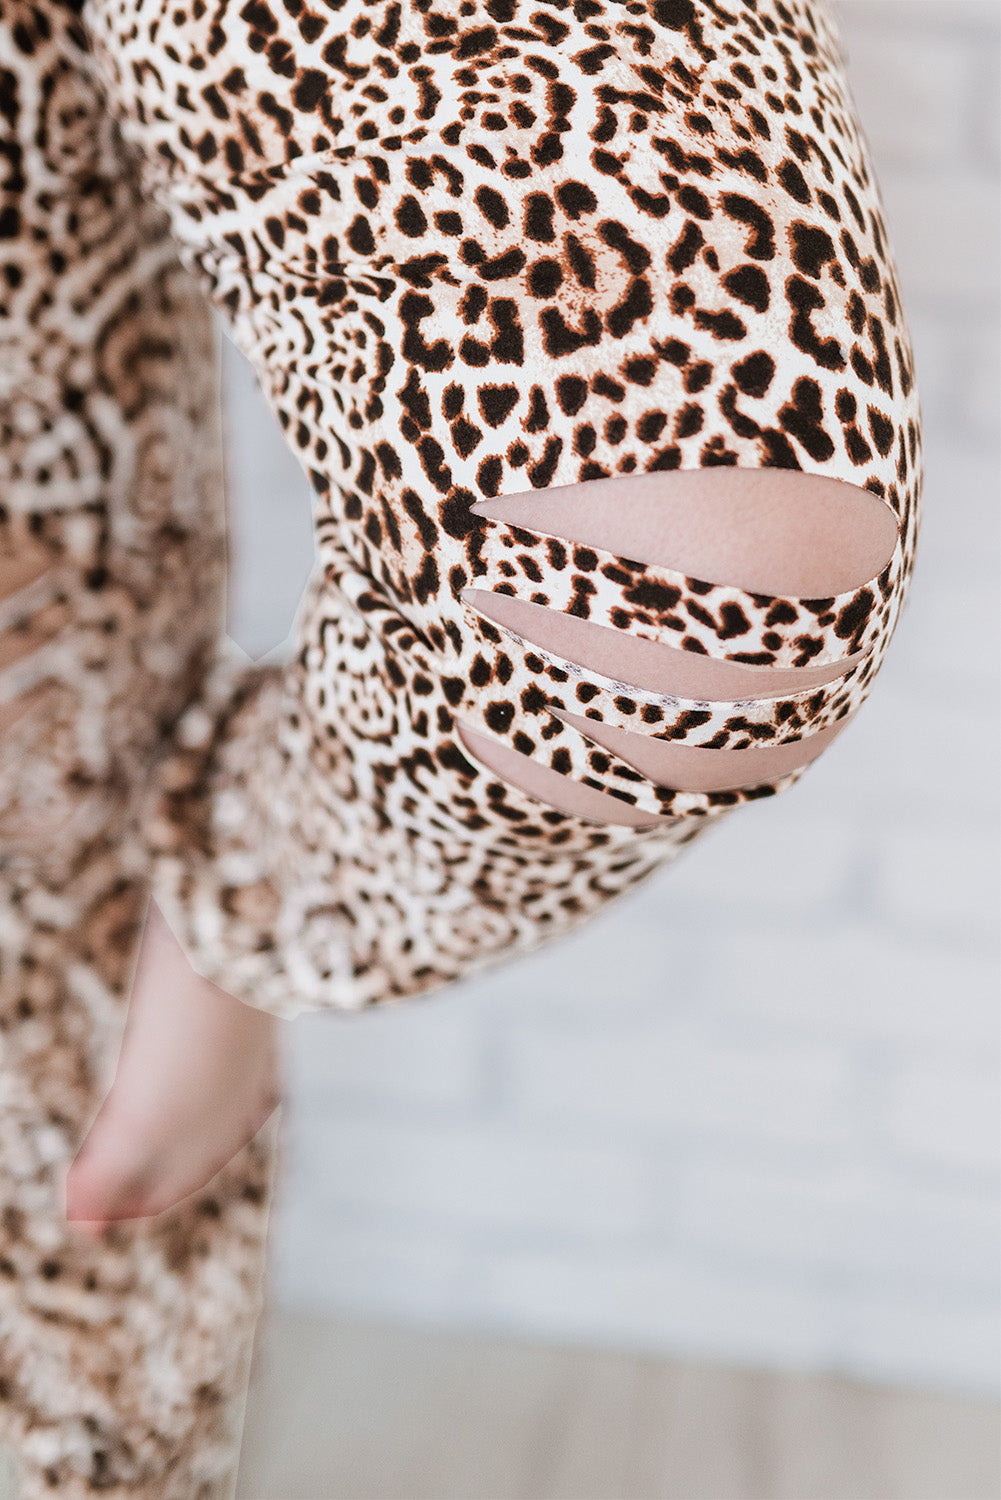 Plus Size Leopard Distressed Joggers with Pockets